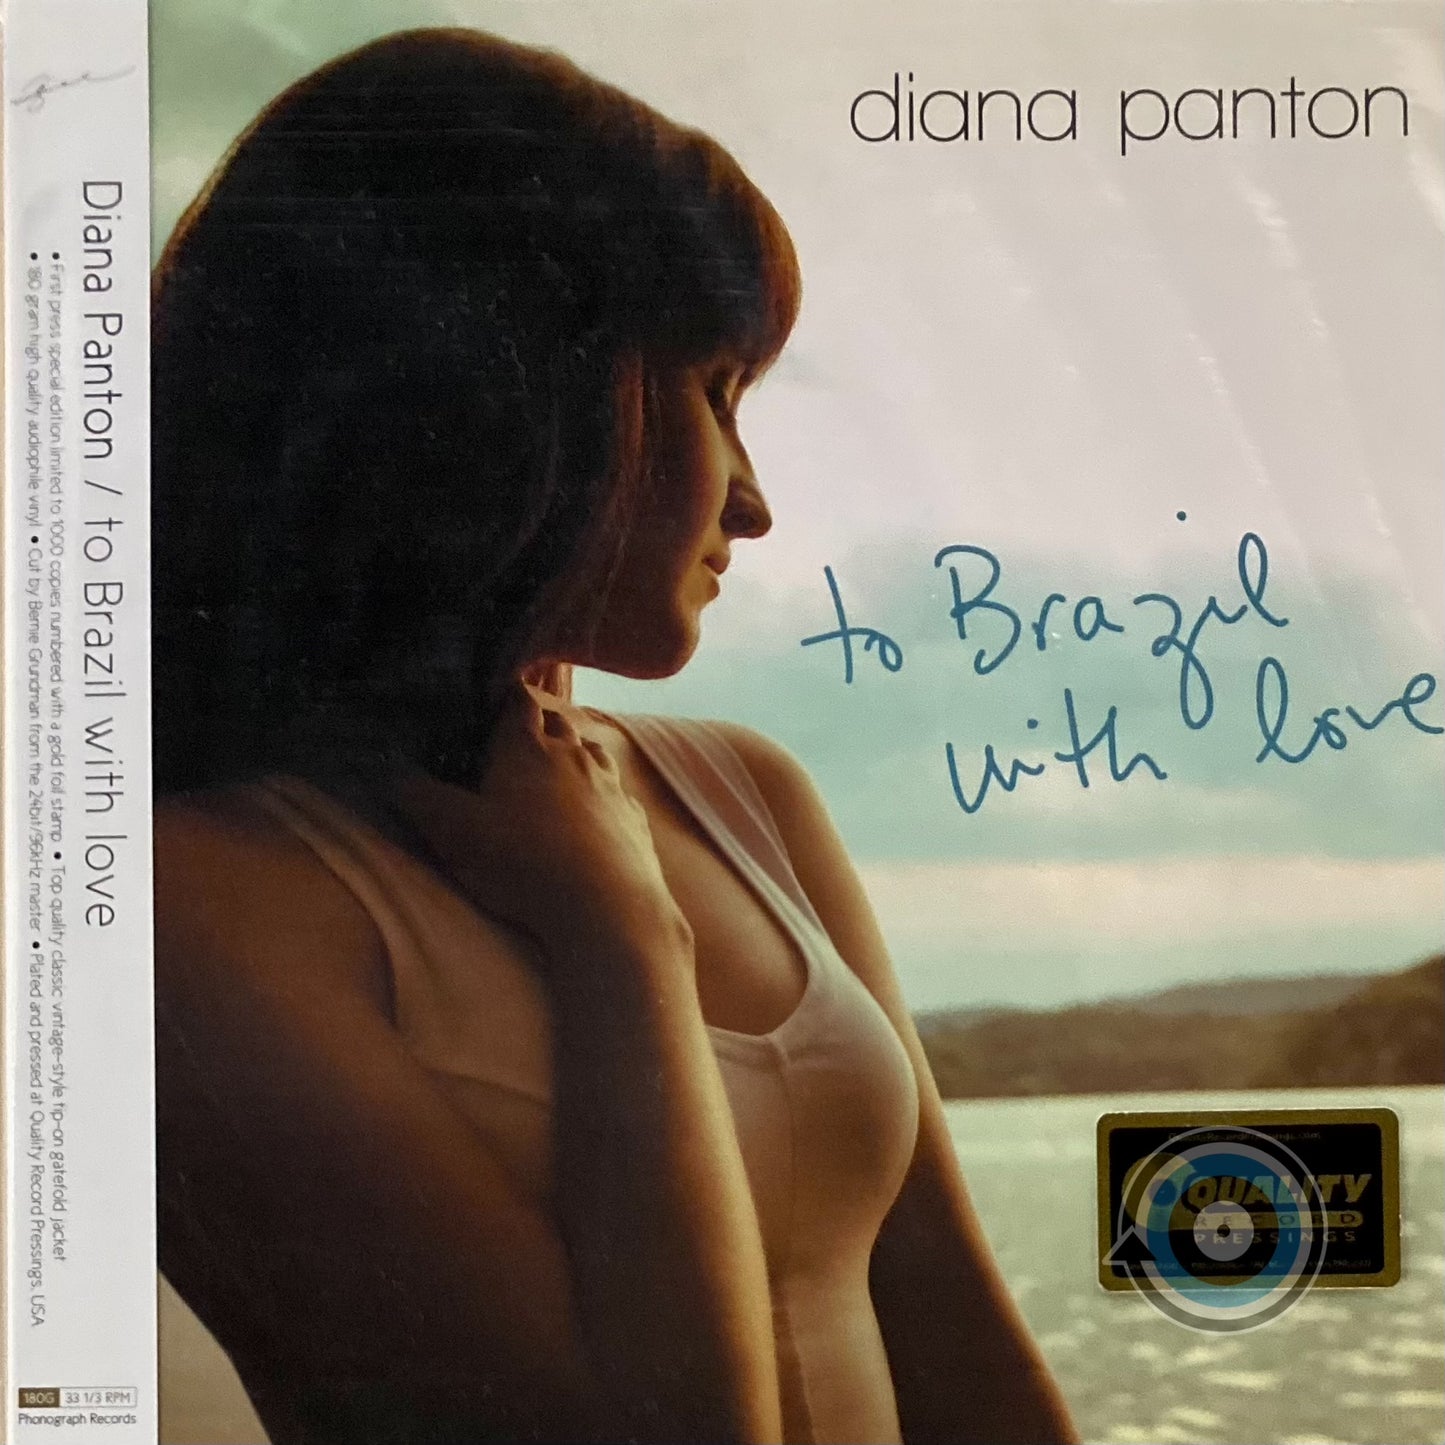 Diana Panton - To Brazil with Love LP (Limited Edition)